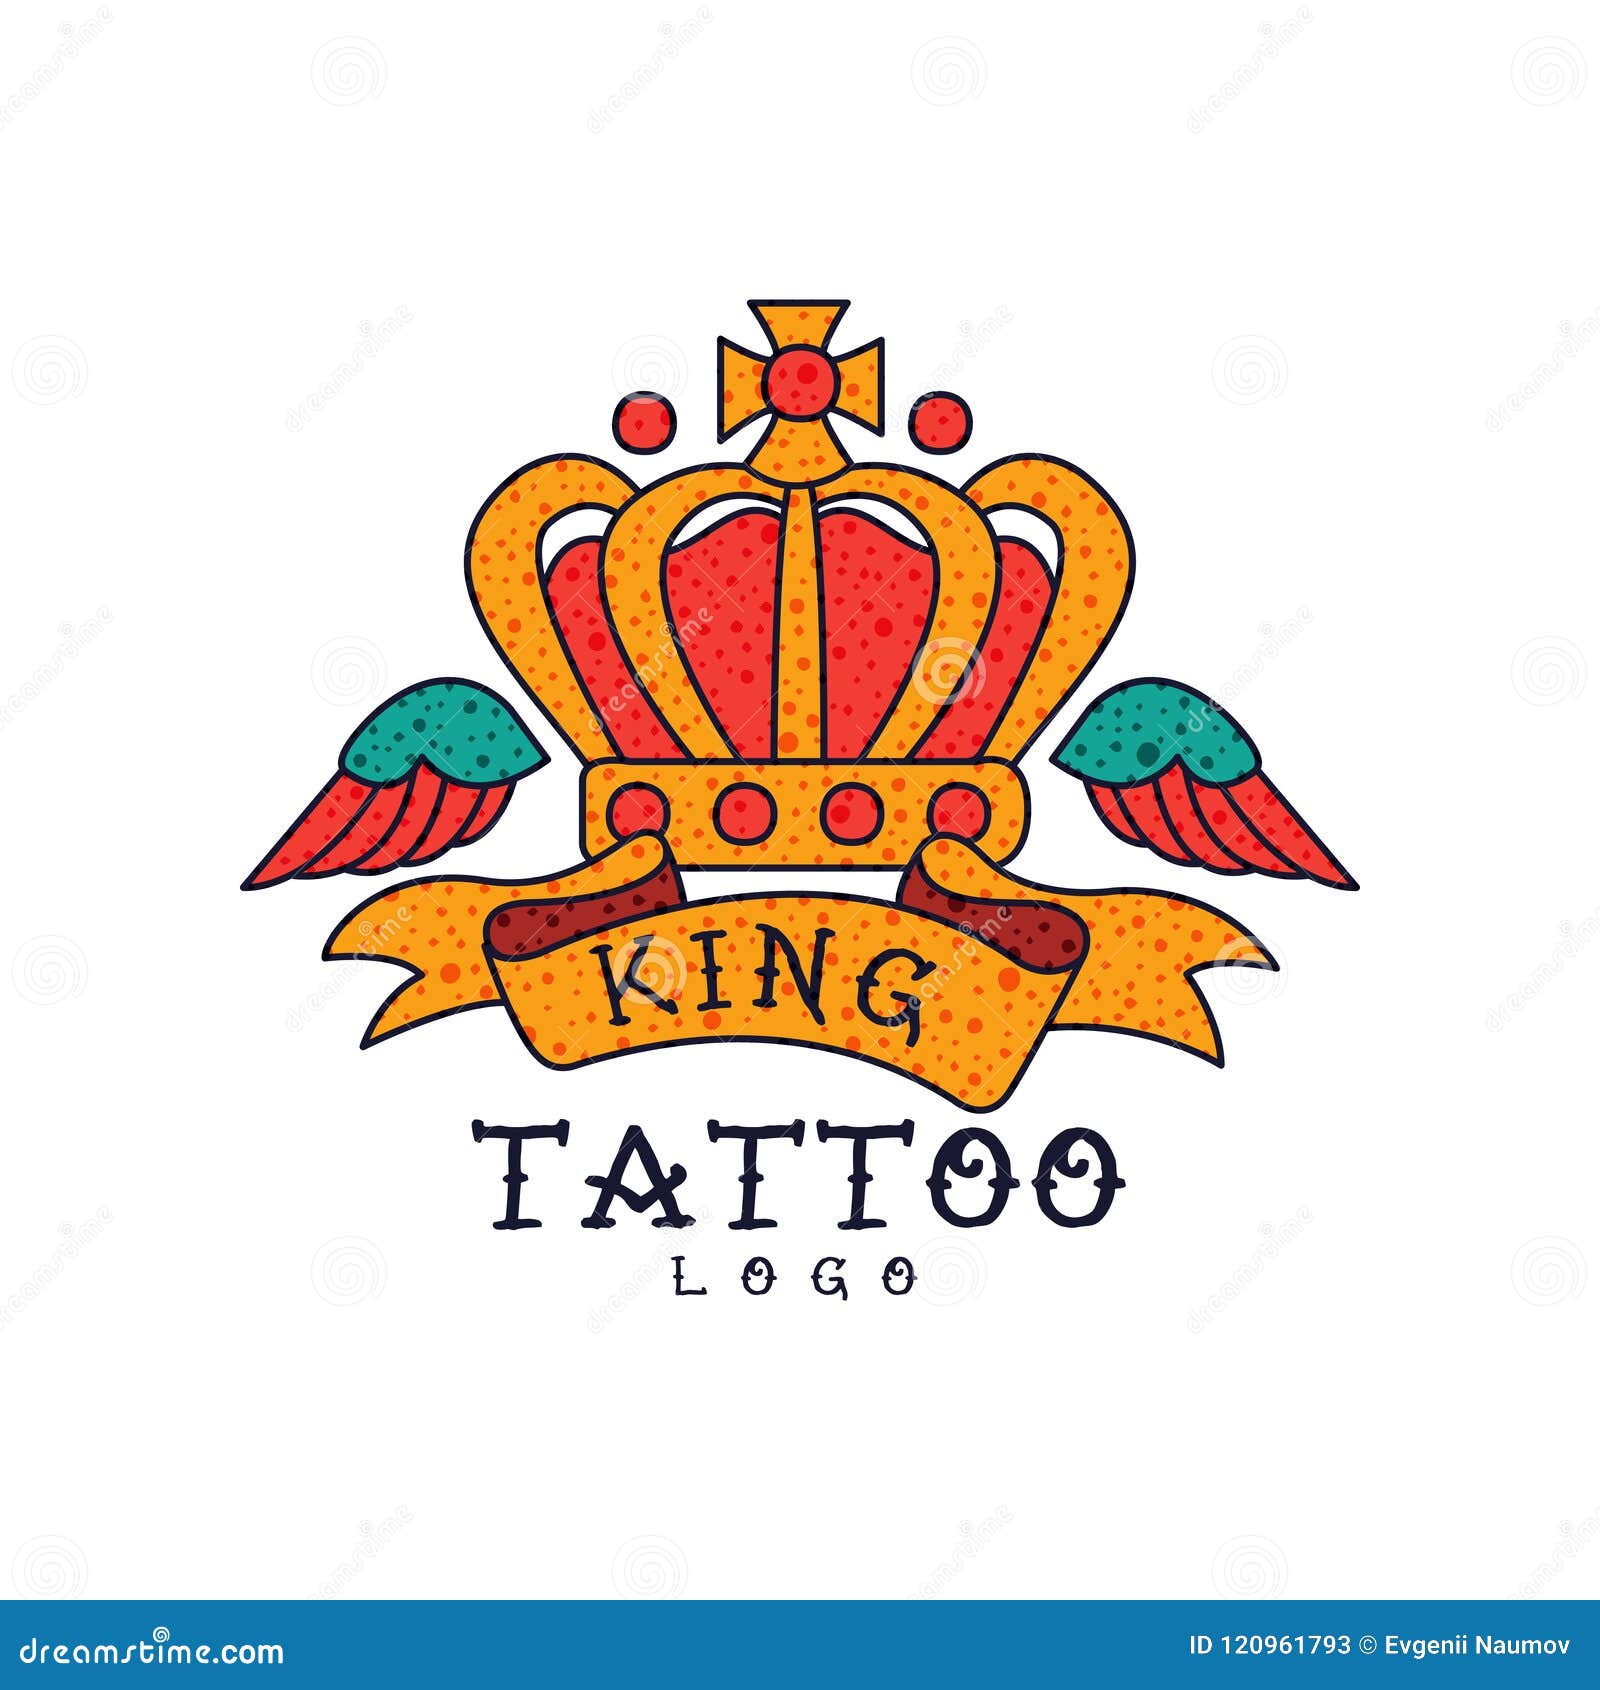 Crown, Wings, Ribbon and Word King, Classic American Old School Tattoo Logo  Design Vector Illustration on a White Stock Vector - Illustration of  poster, love: 120961793